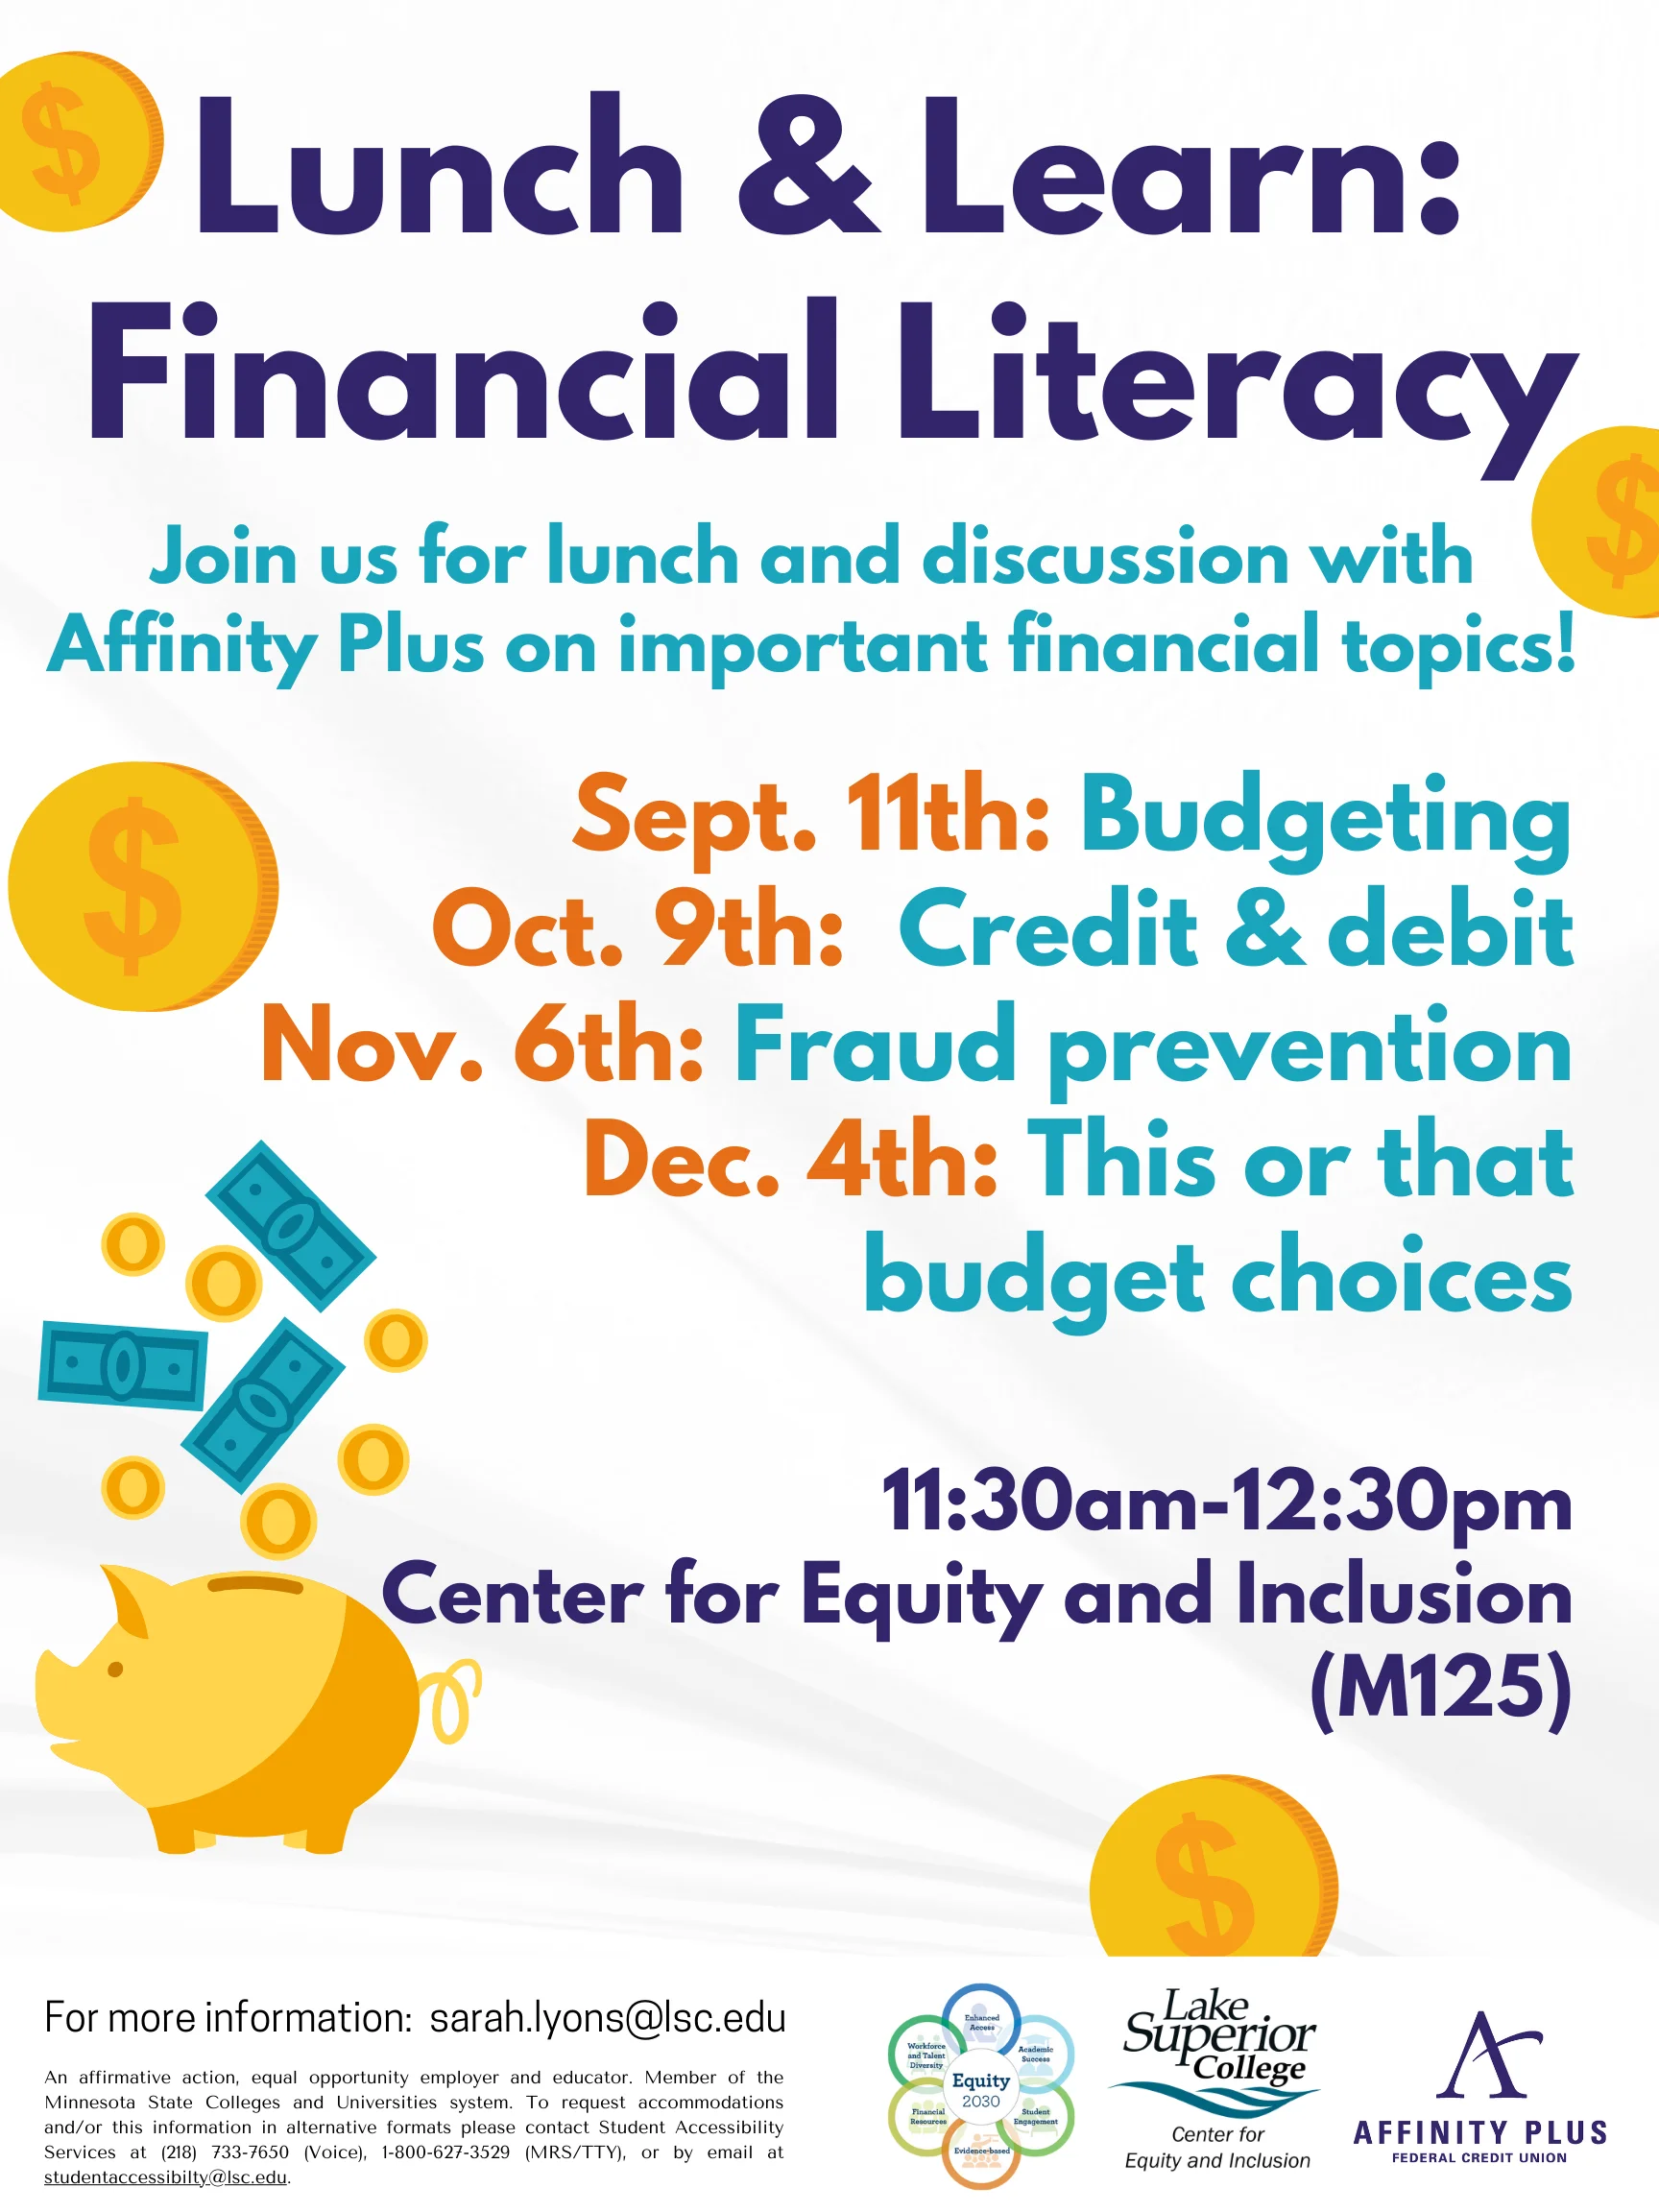 Lunch and Learn: Financial Literacy